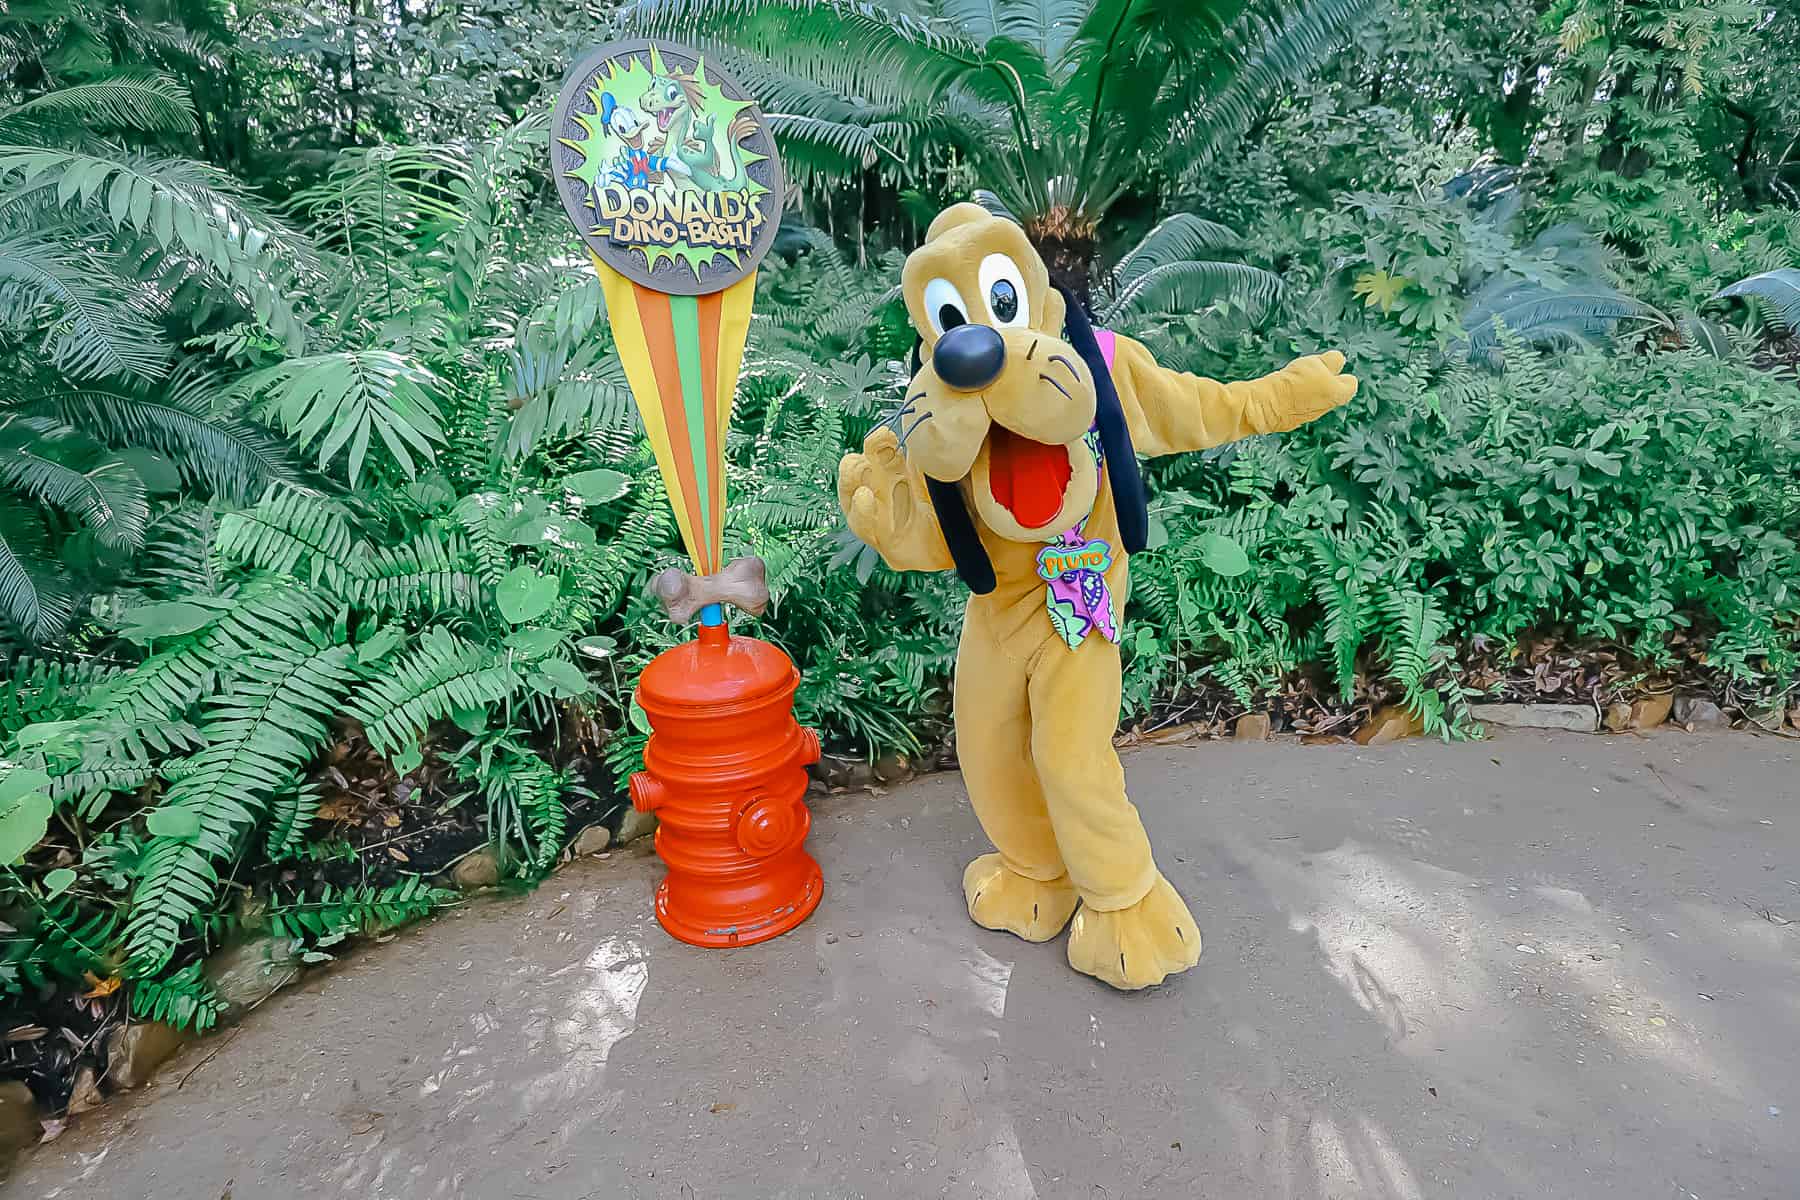 Pluto poses for a photo next to Donald's Dino-Bash sign 